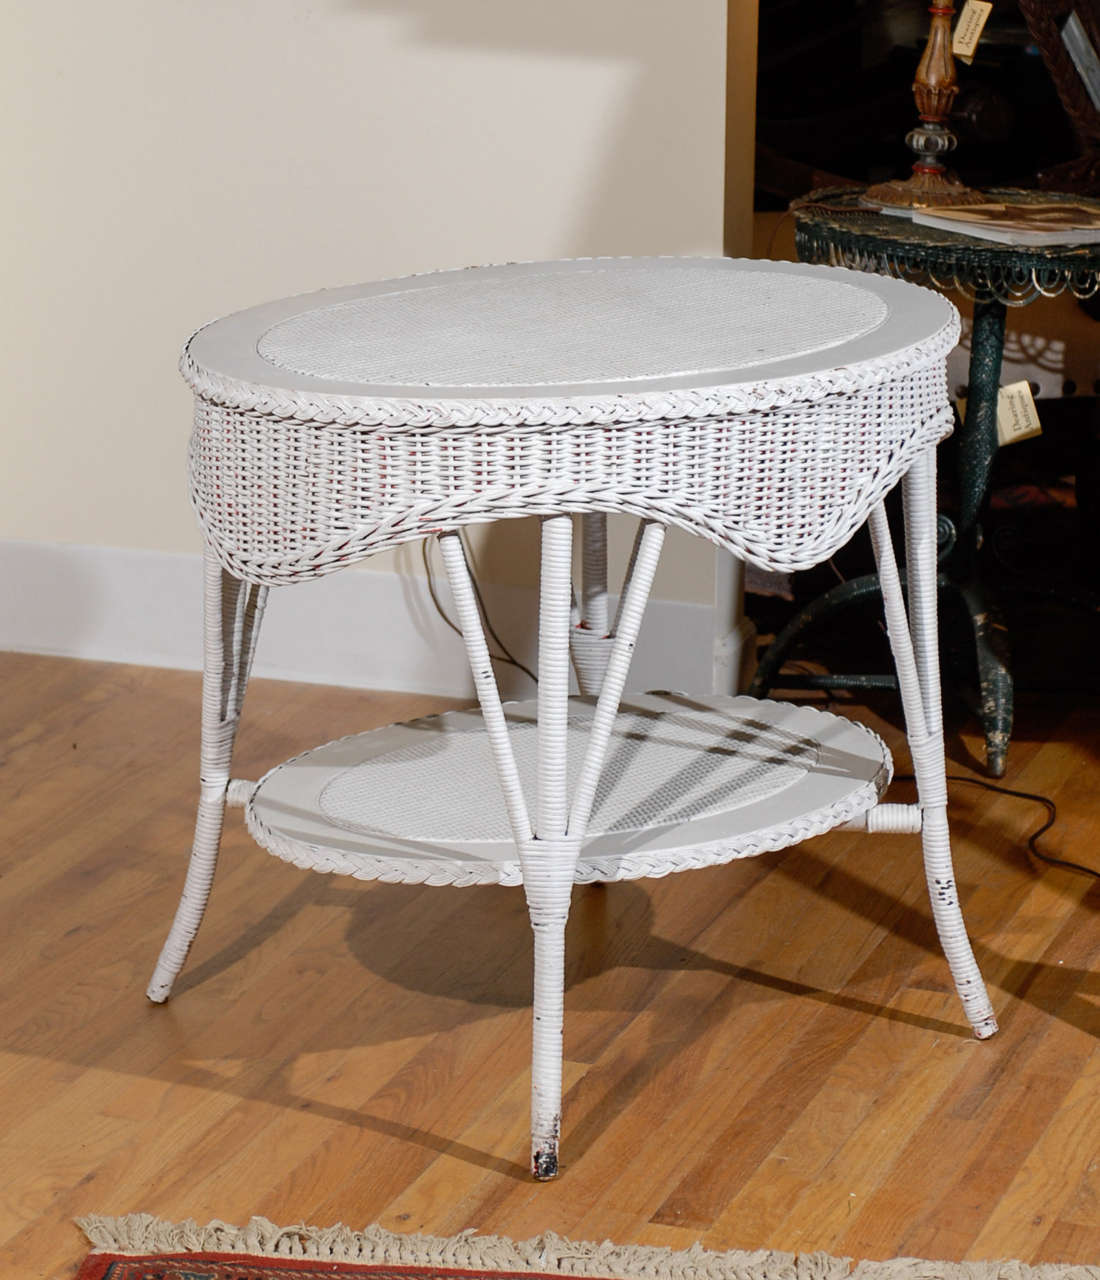 This is a wonderful Bar Harbor table.  The wavy apron can be seen from all angles.  There is a shelf with an woven center.  The table has a braid edge and wrapped legs.  This is a fantastic piece of Americana.